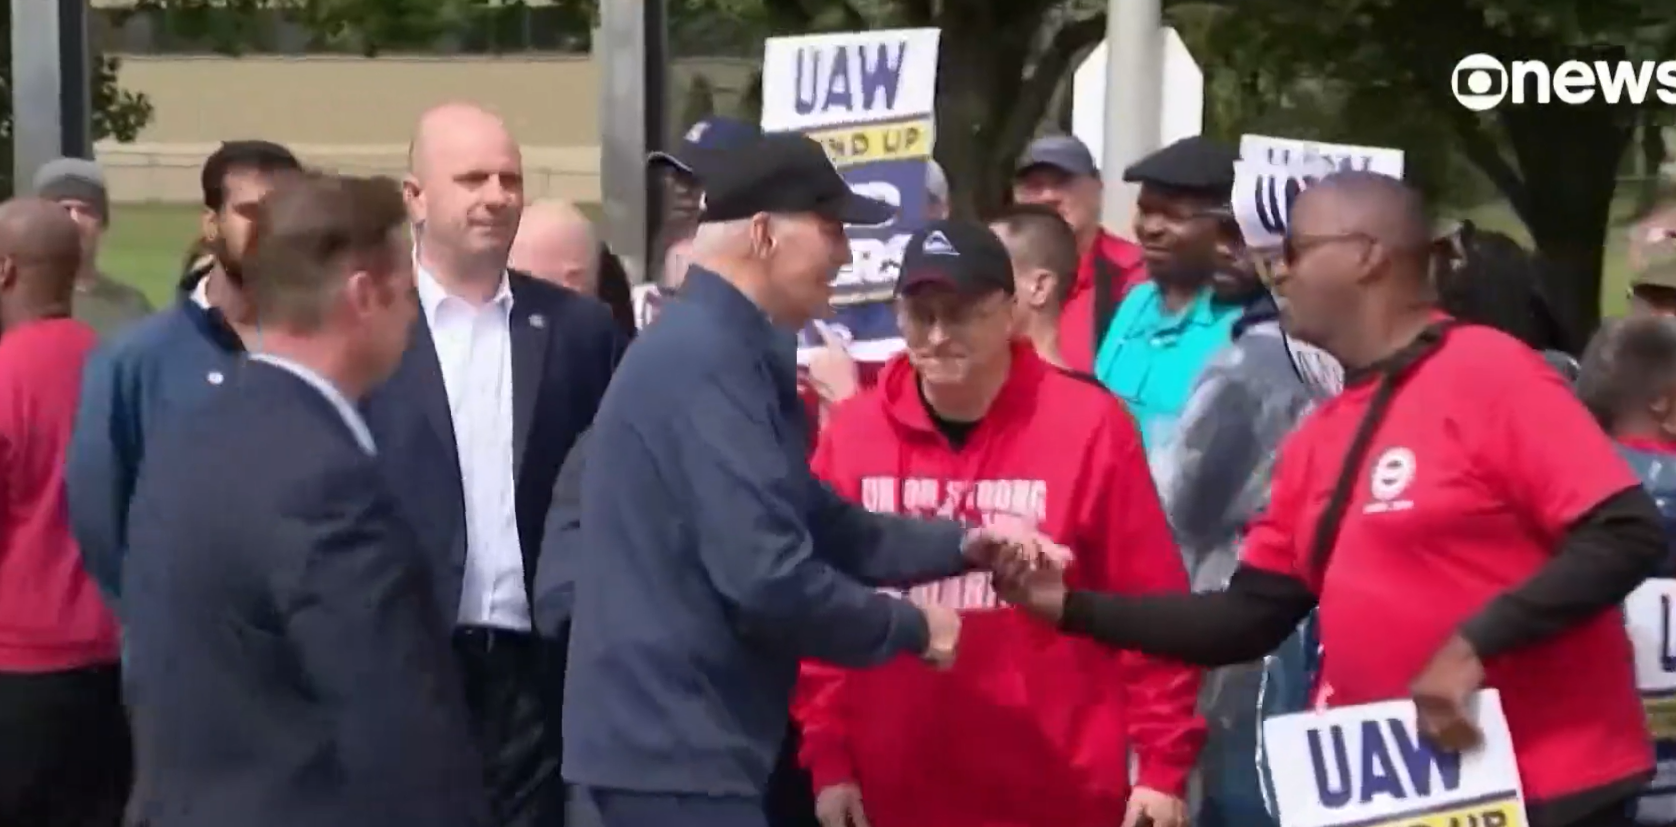 On Tuesday (26), the President of the United States, Joe Biden, participated in a picket with auto industry workers in Belleville, Michigan. He expressed support for the call for a 40% pay rise and said workers deserve "much more" than they are receiving. (Photo:Twitter)